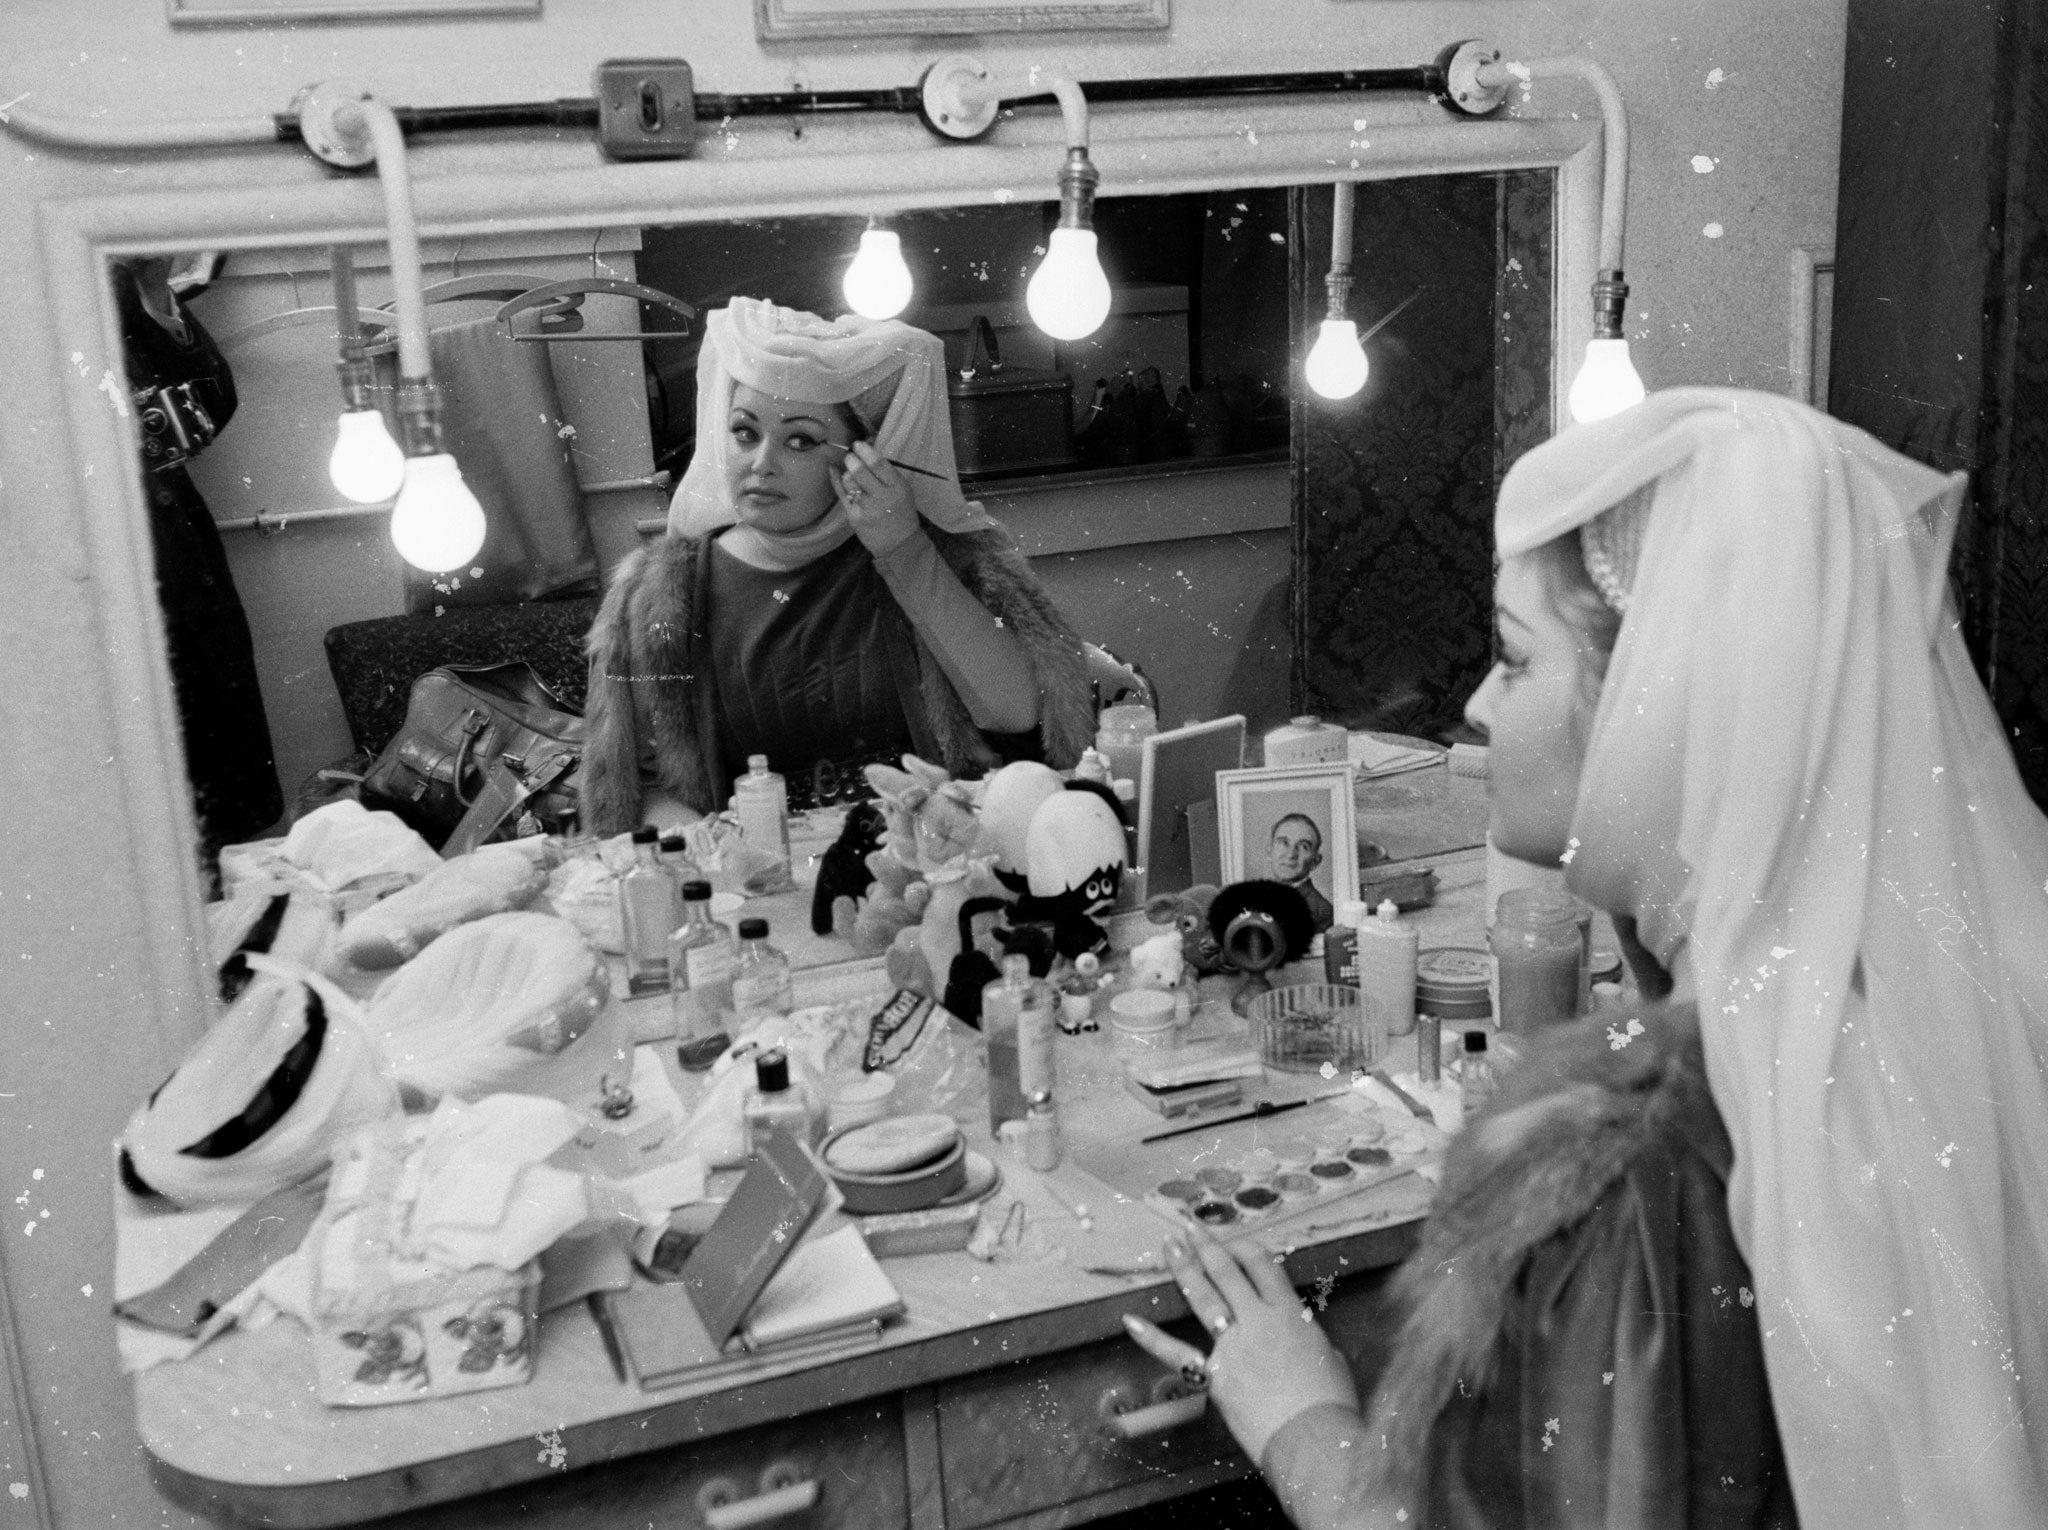 November 1964: Welsh opera singer Gwyneth Jones applying makeup in her dressing room backstage at Covent Garden before her performance in Visconti's production of 'Trovatore'.